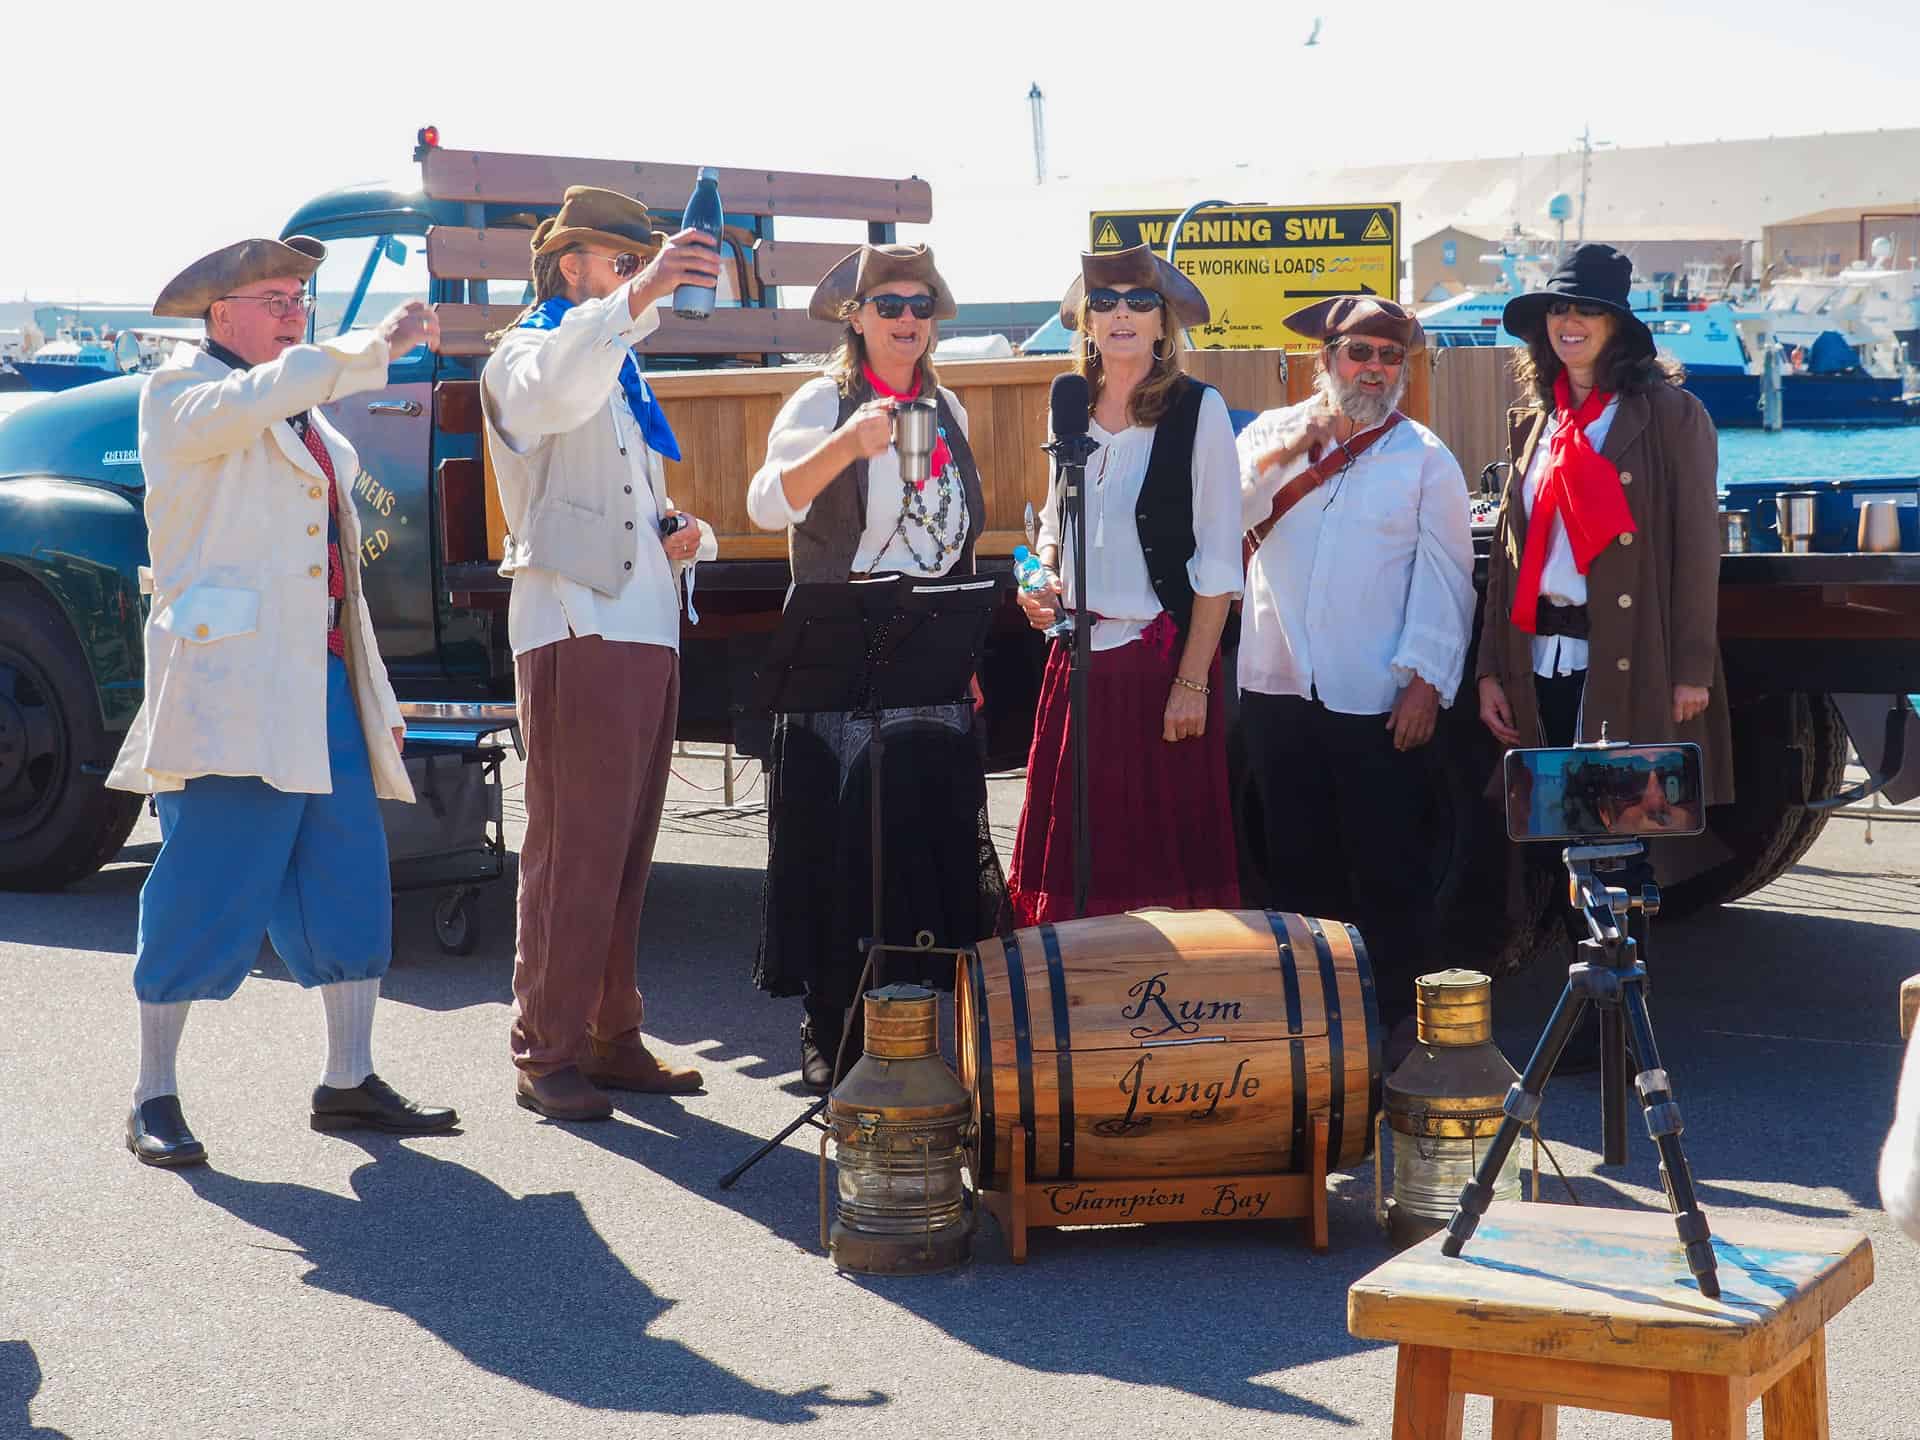 Sea shanty singers at The Shore Leave Festival in Geraldton, Western Australia